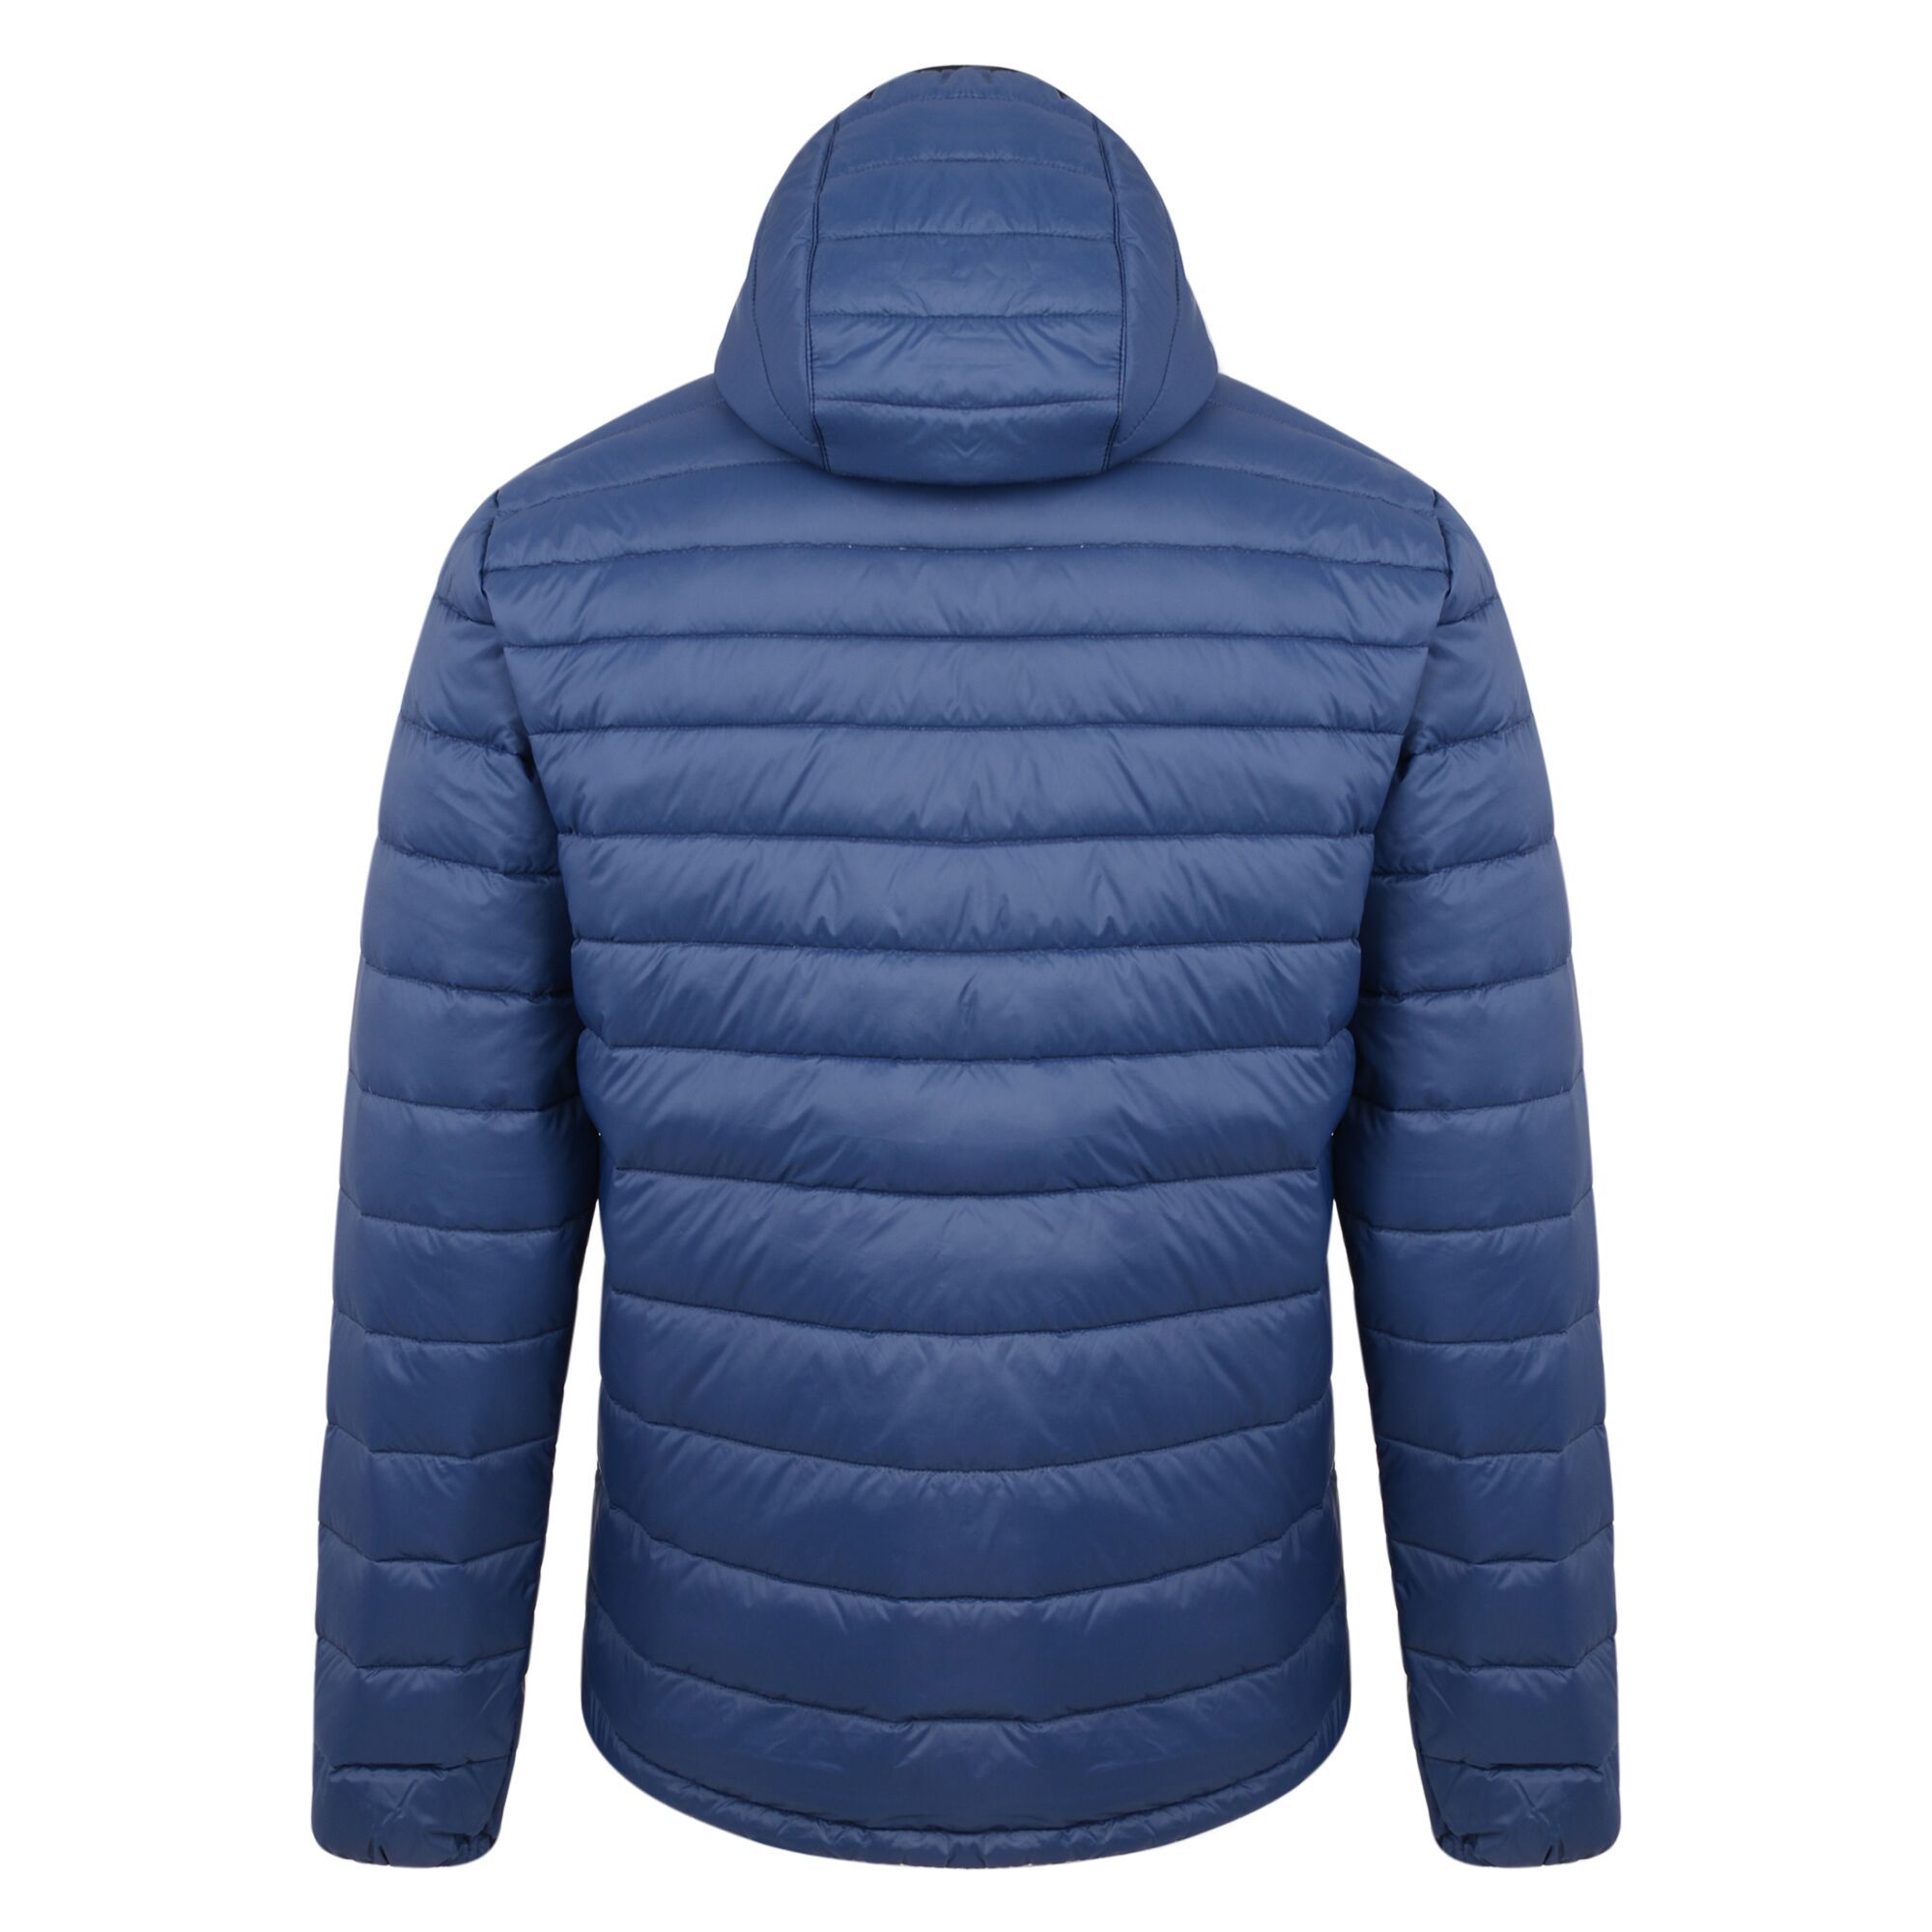 Material: polyamide: 100%. ILoft Down fill power 600. Premium duck down fill: 90% down, 10% feathers. Nylon/polyester downproof fabric. Water repellent finish. High warmth to weight ratio. Grown on hood. 2 lower zip pockets. Stretch binding to hood. Elasticated cuffs. Adjustable hem. Packaway style.